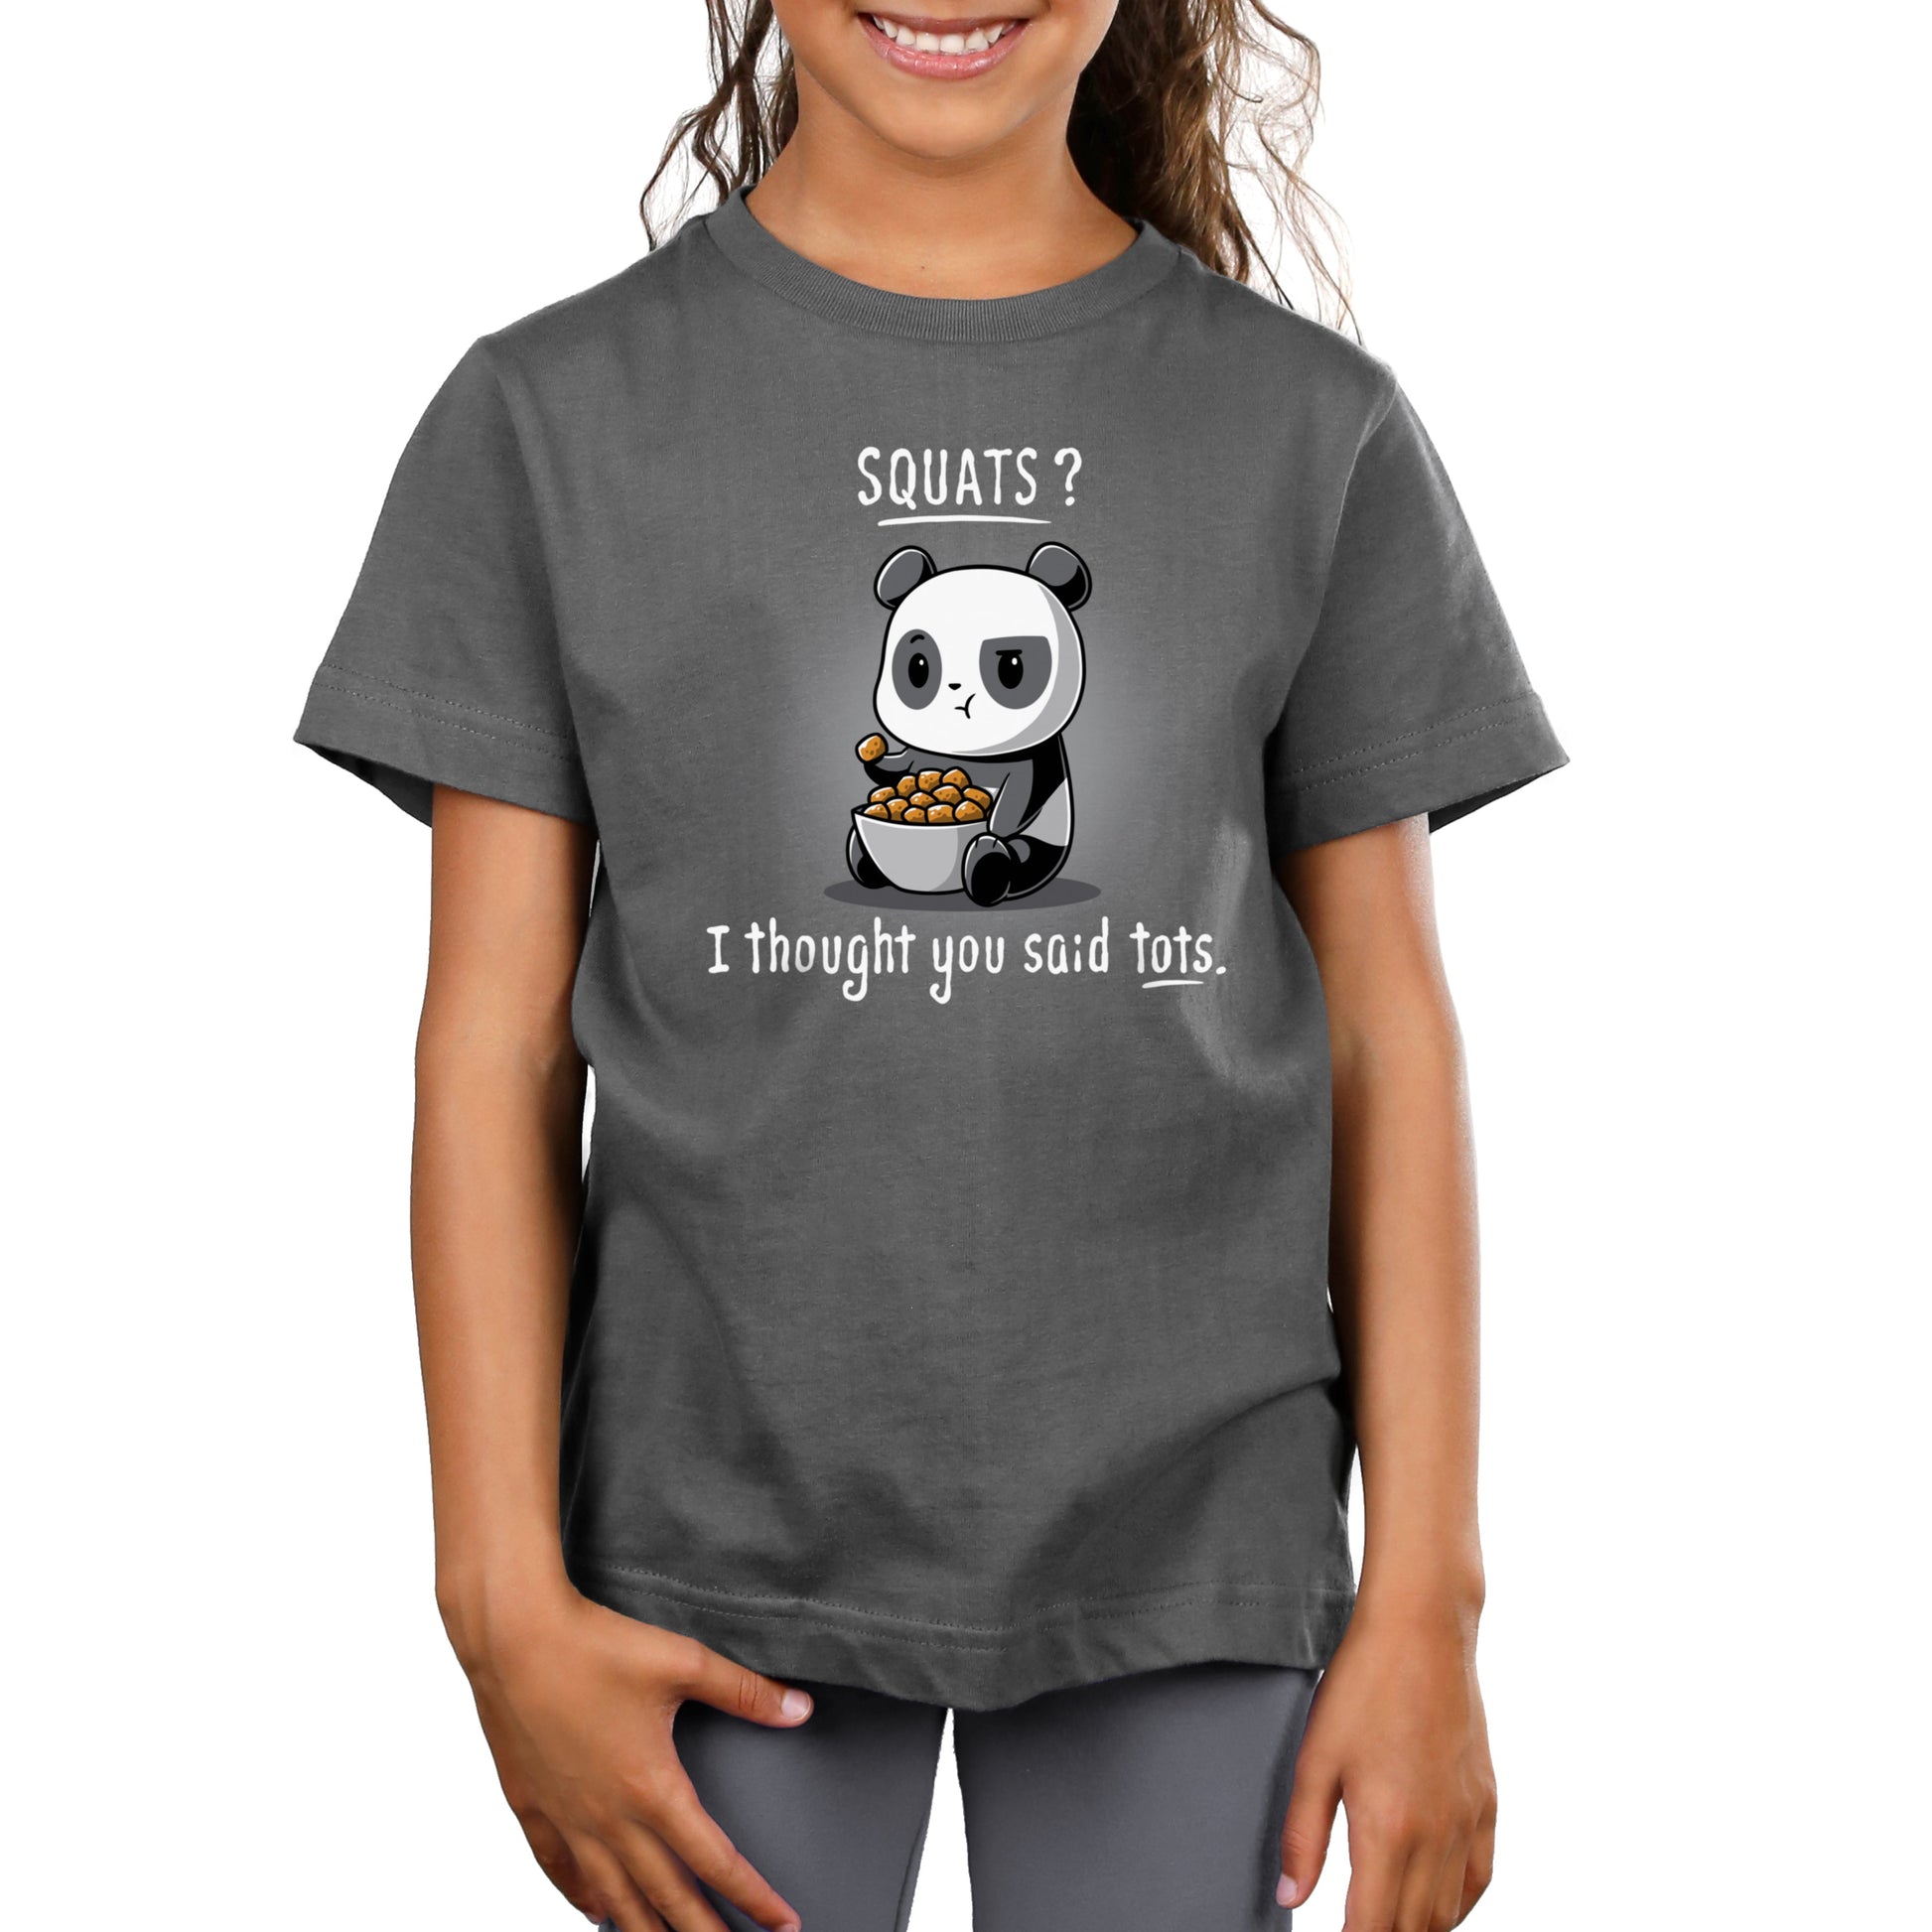 A girl wears a charcoal gray T-shirt featuring a cartoon panda holding tater tots with the text "Tots > Squats" by monsterdigital.